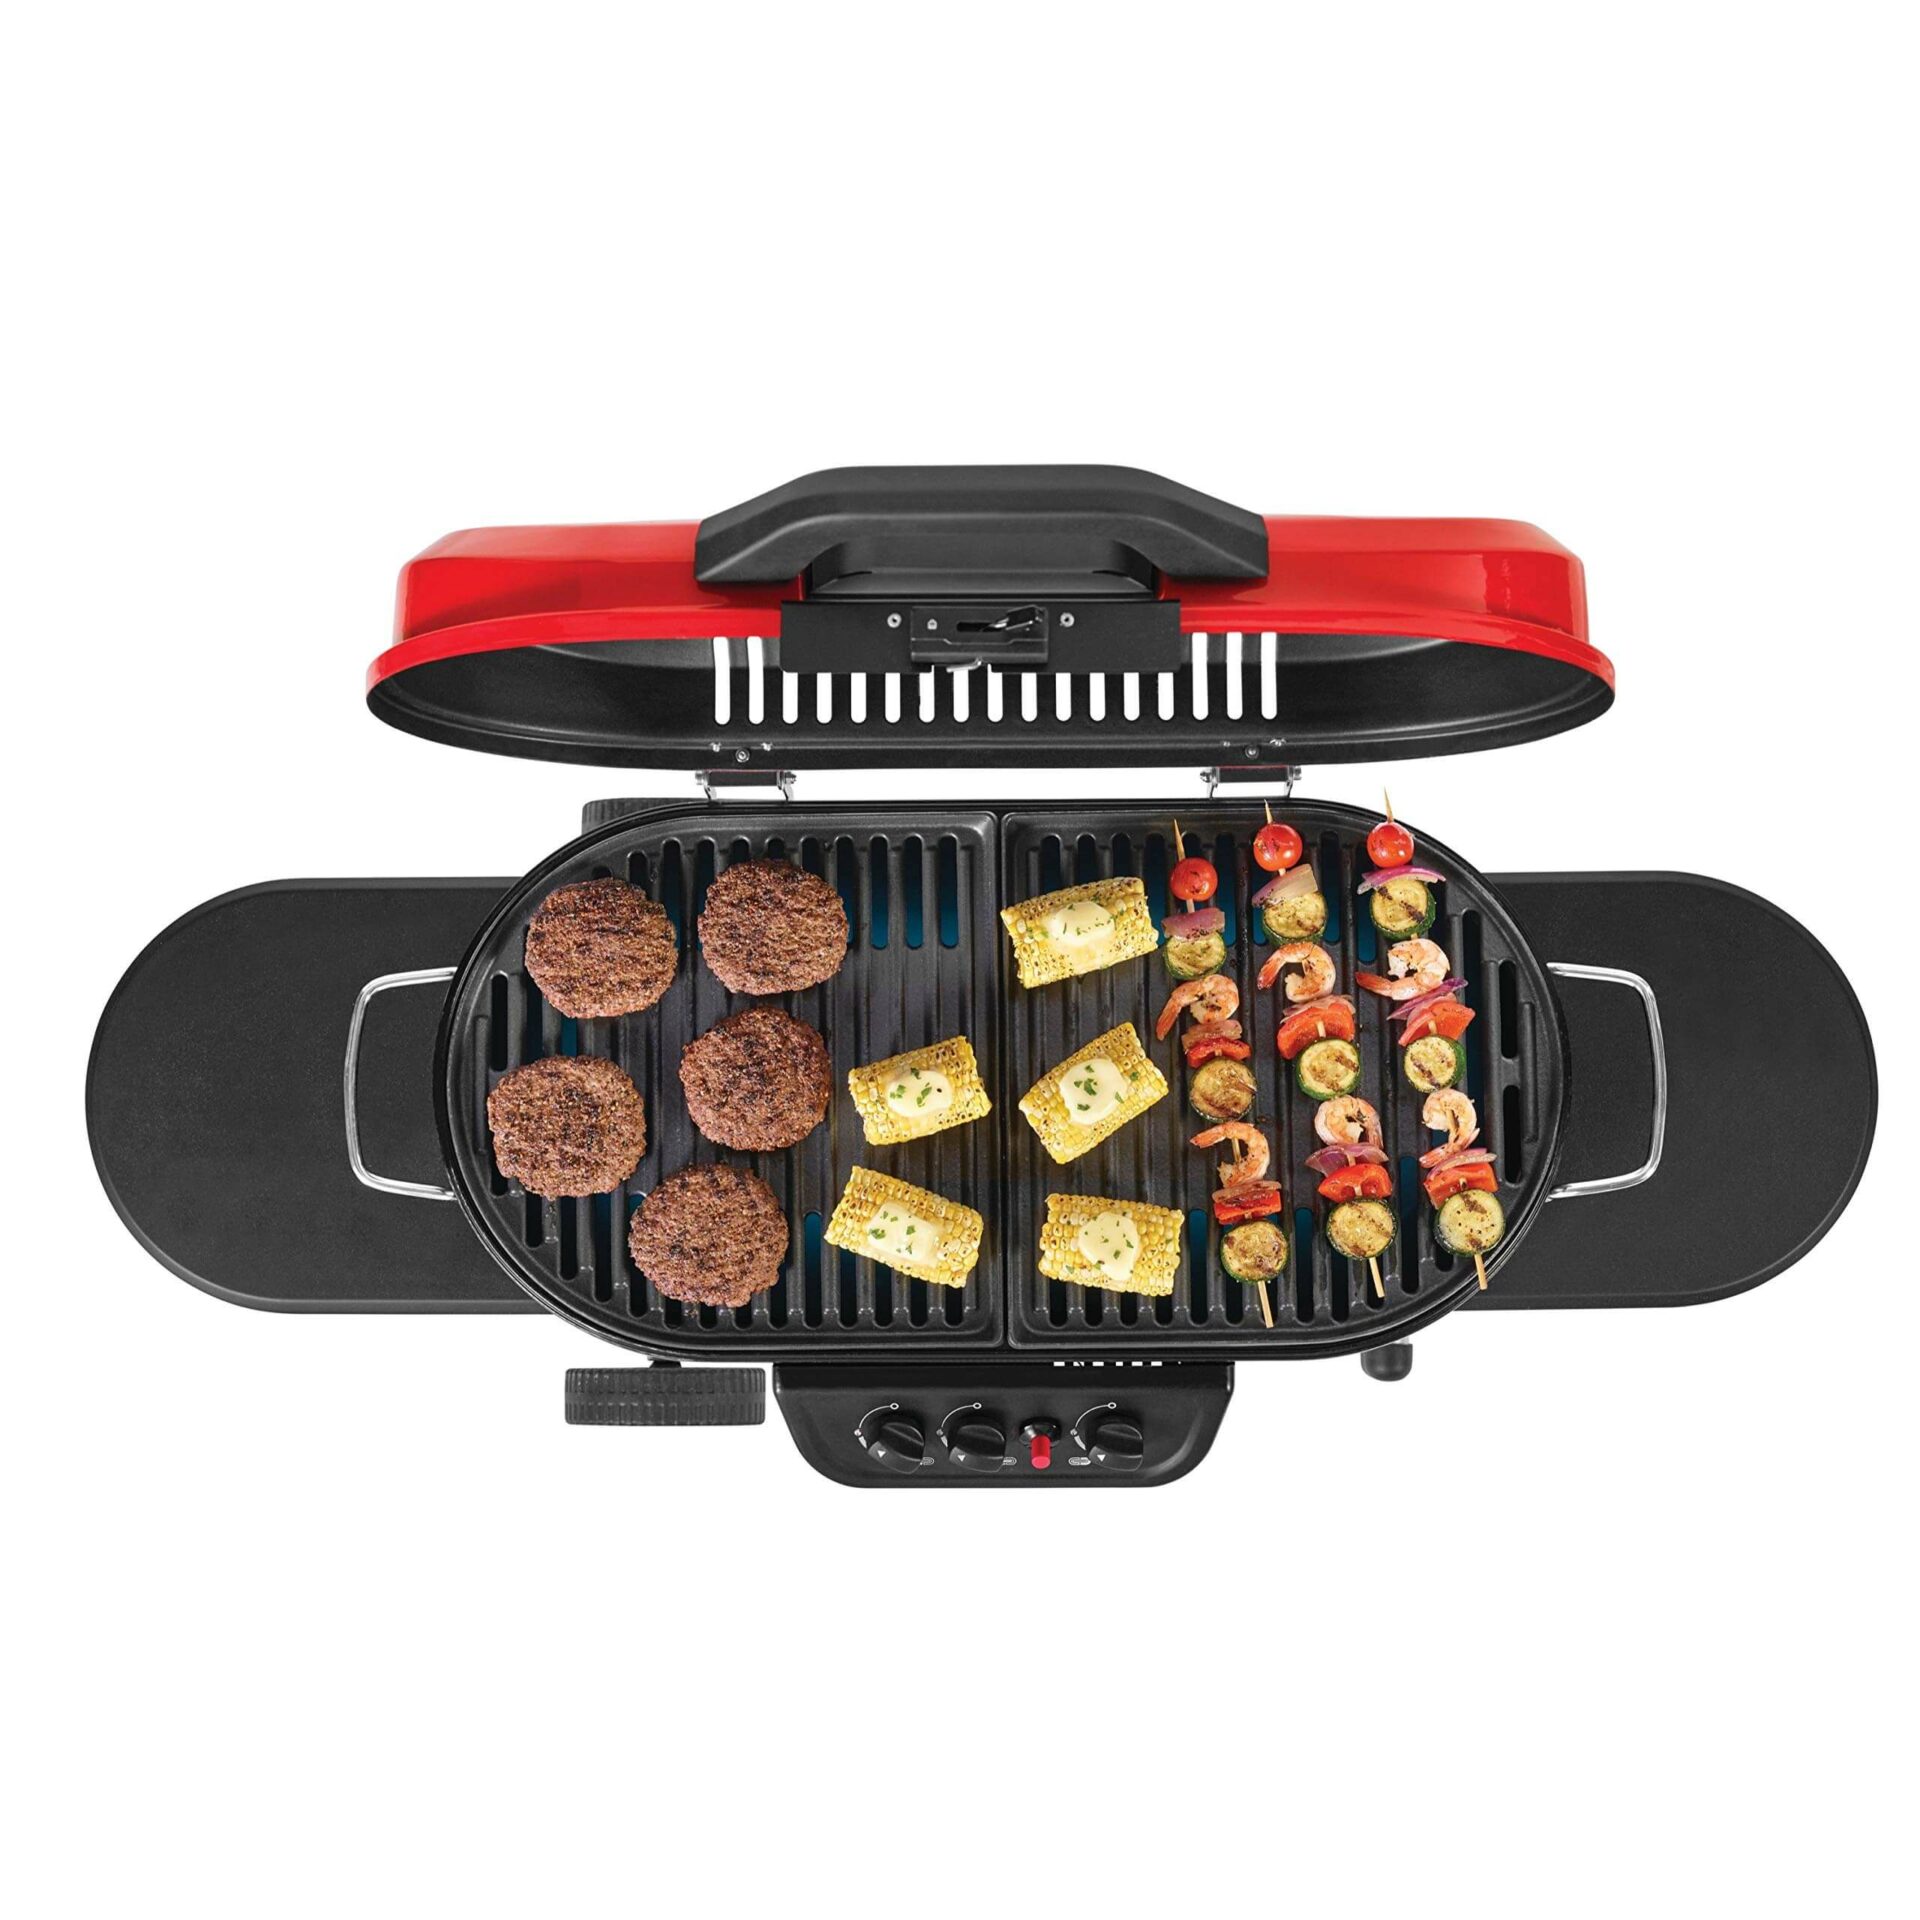 coleman camping grill, best gas grills under $500, coleman gas grill for home grilling